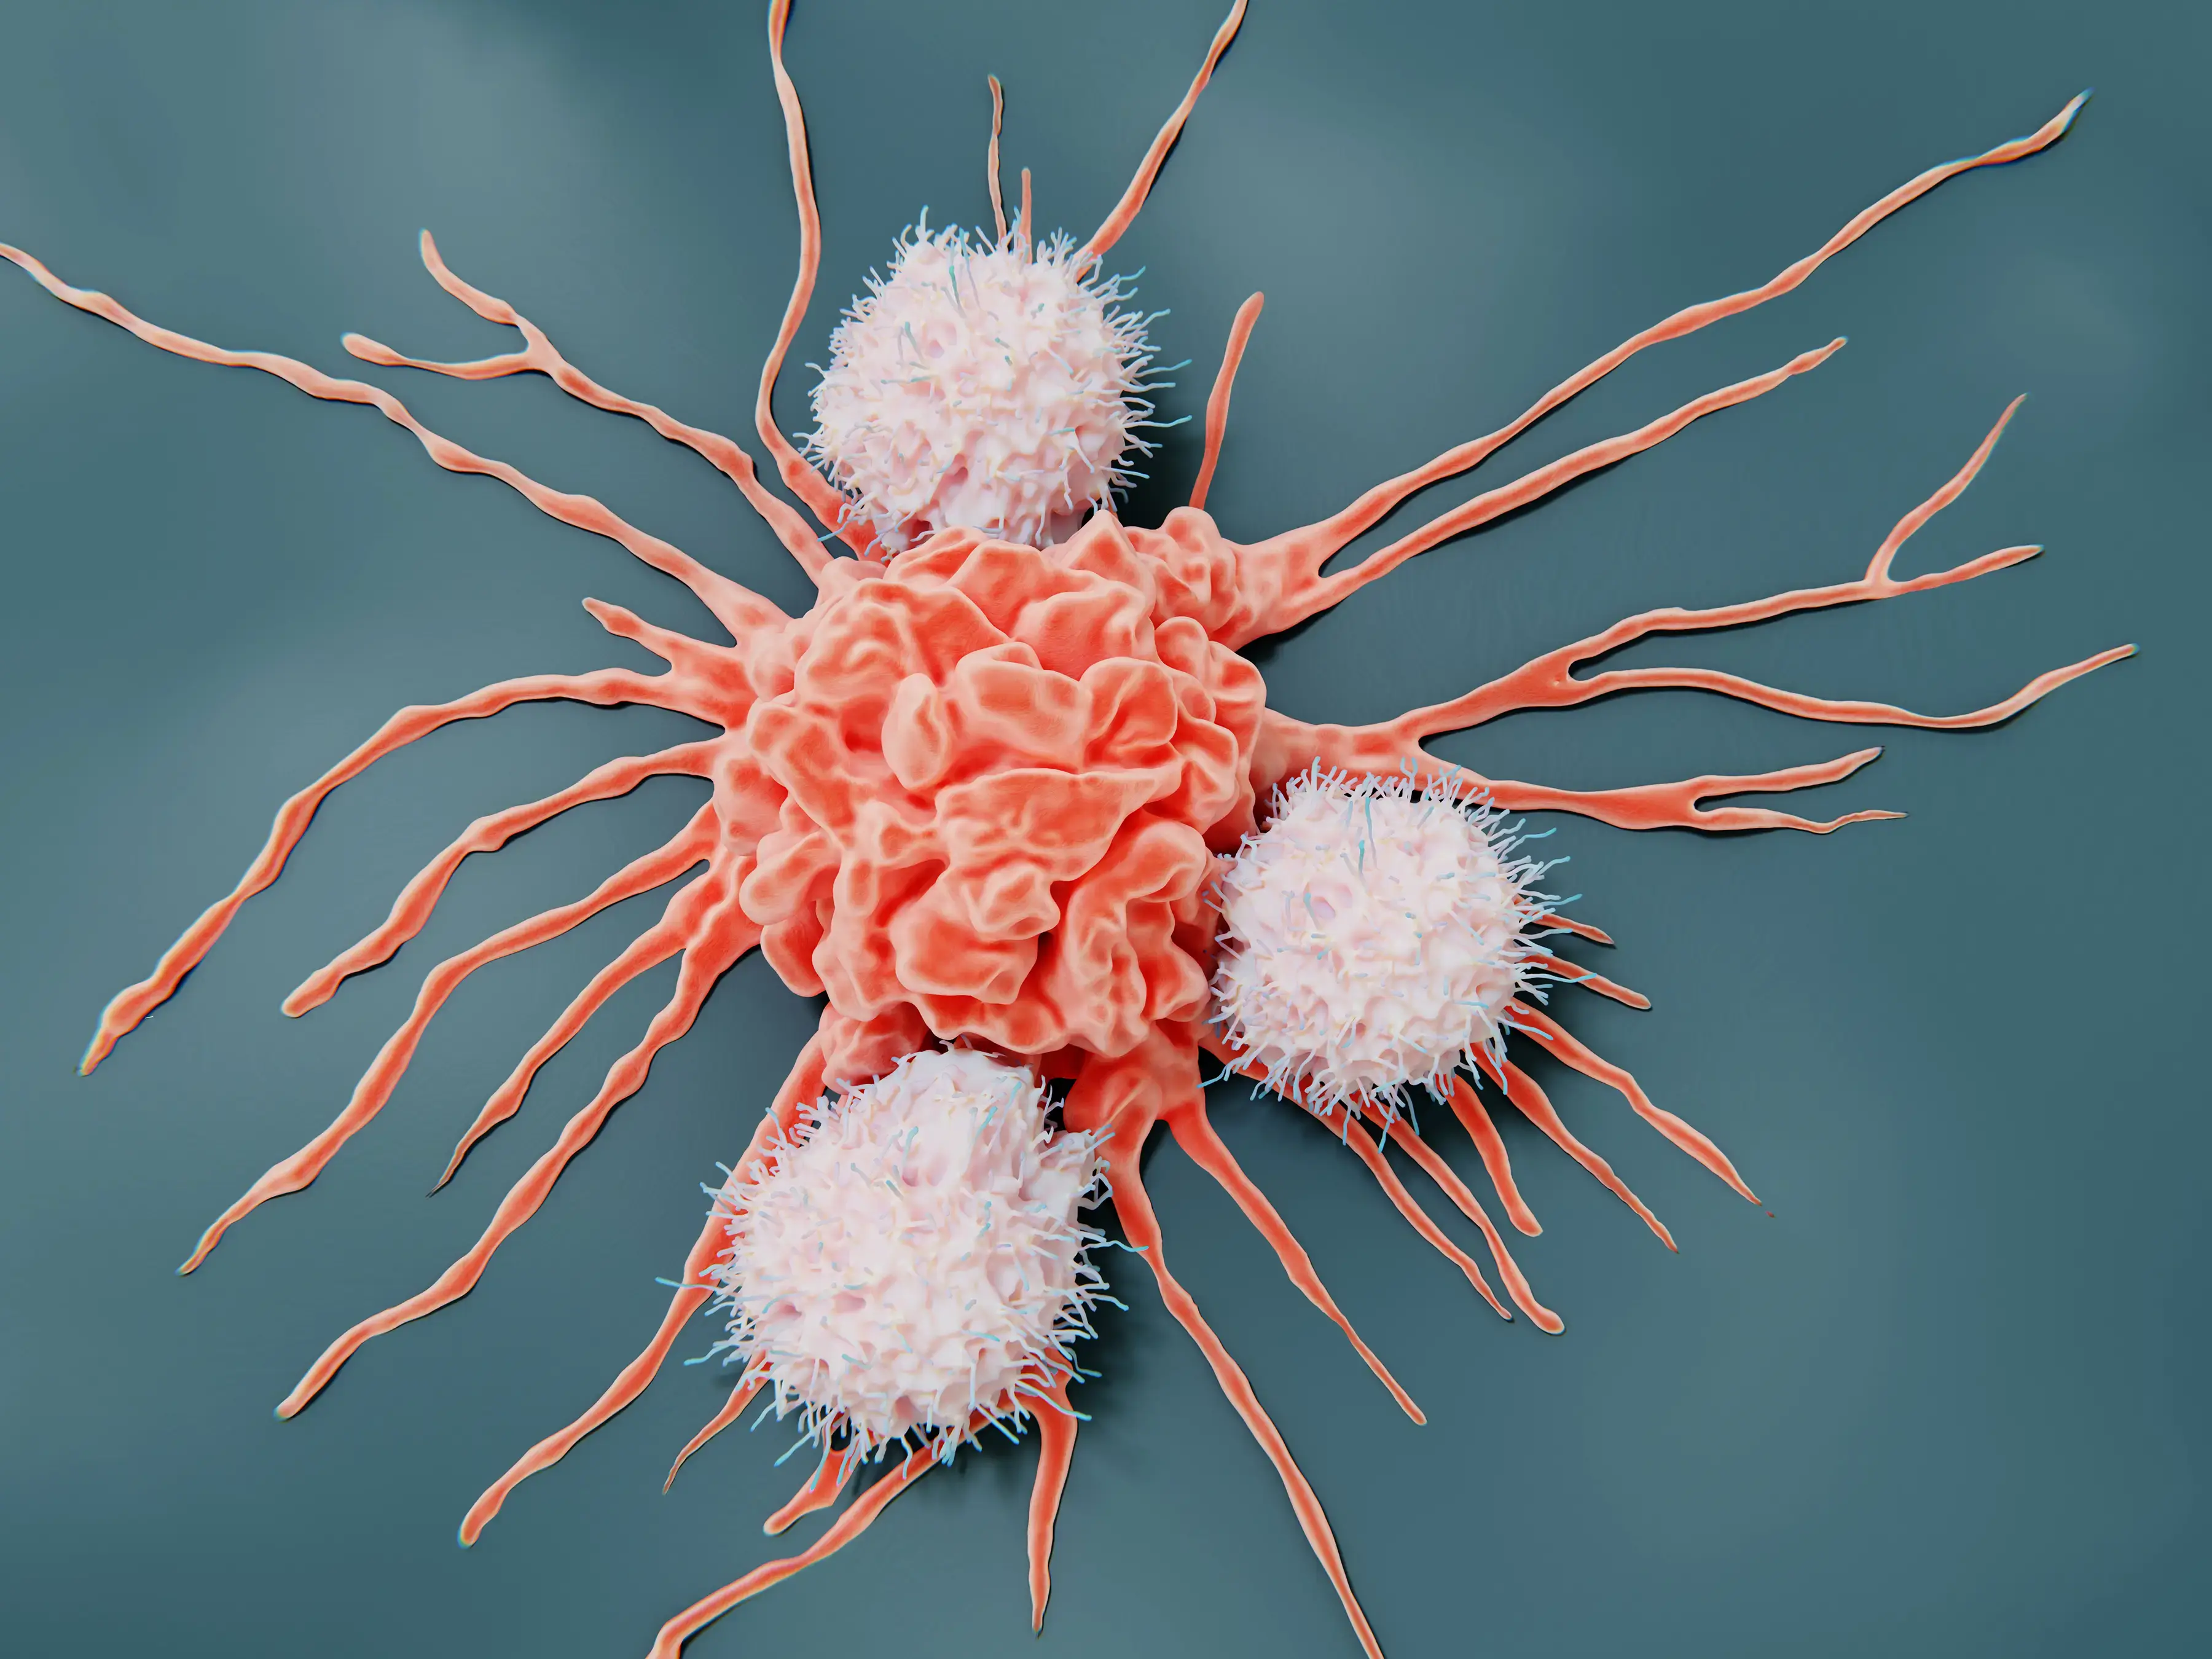 Immune cells attacking a tumor cell during an immuno-oncology in vivo study.